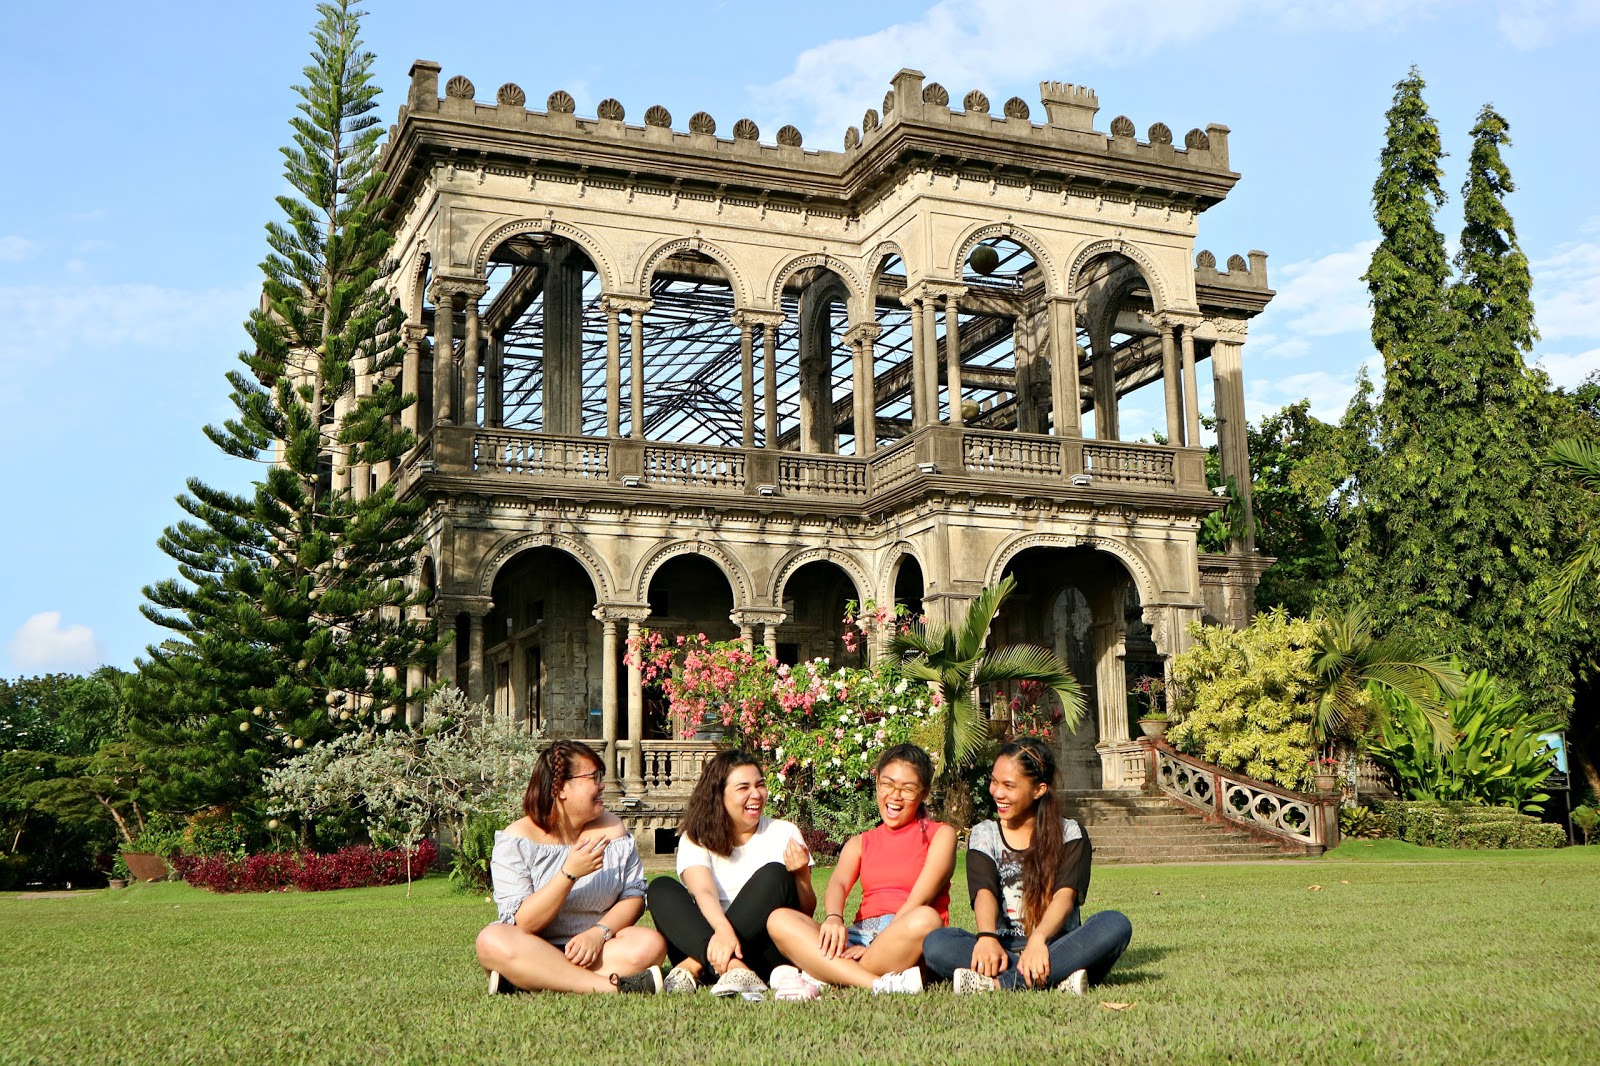 The Ruins Bacolod Prenup: Love Amidst Beauty